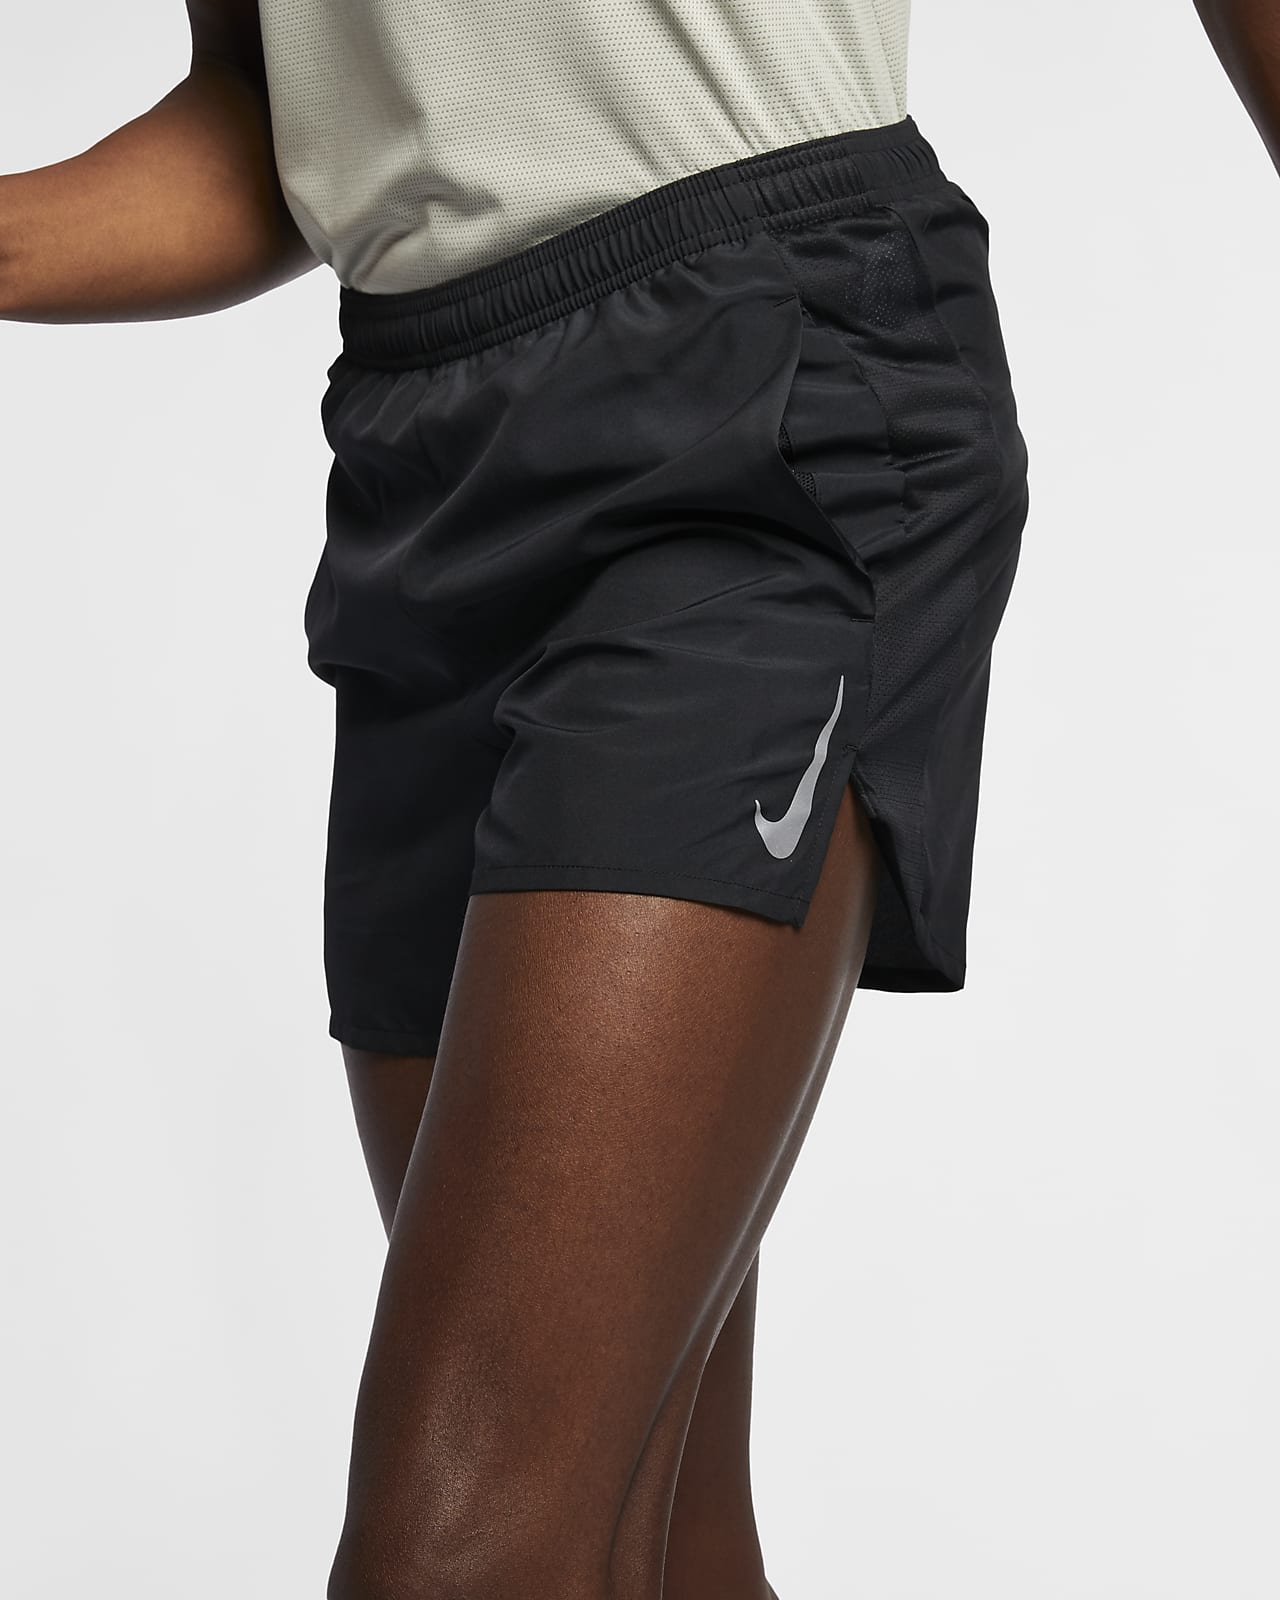 nike mens running shorts with liner